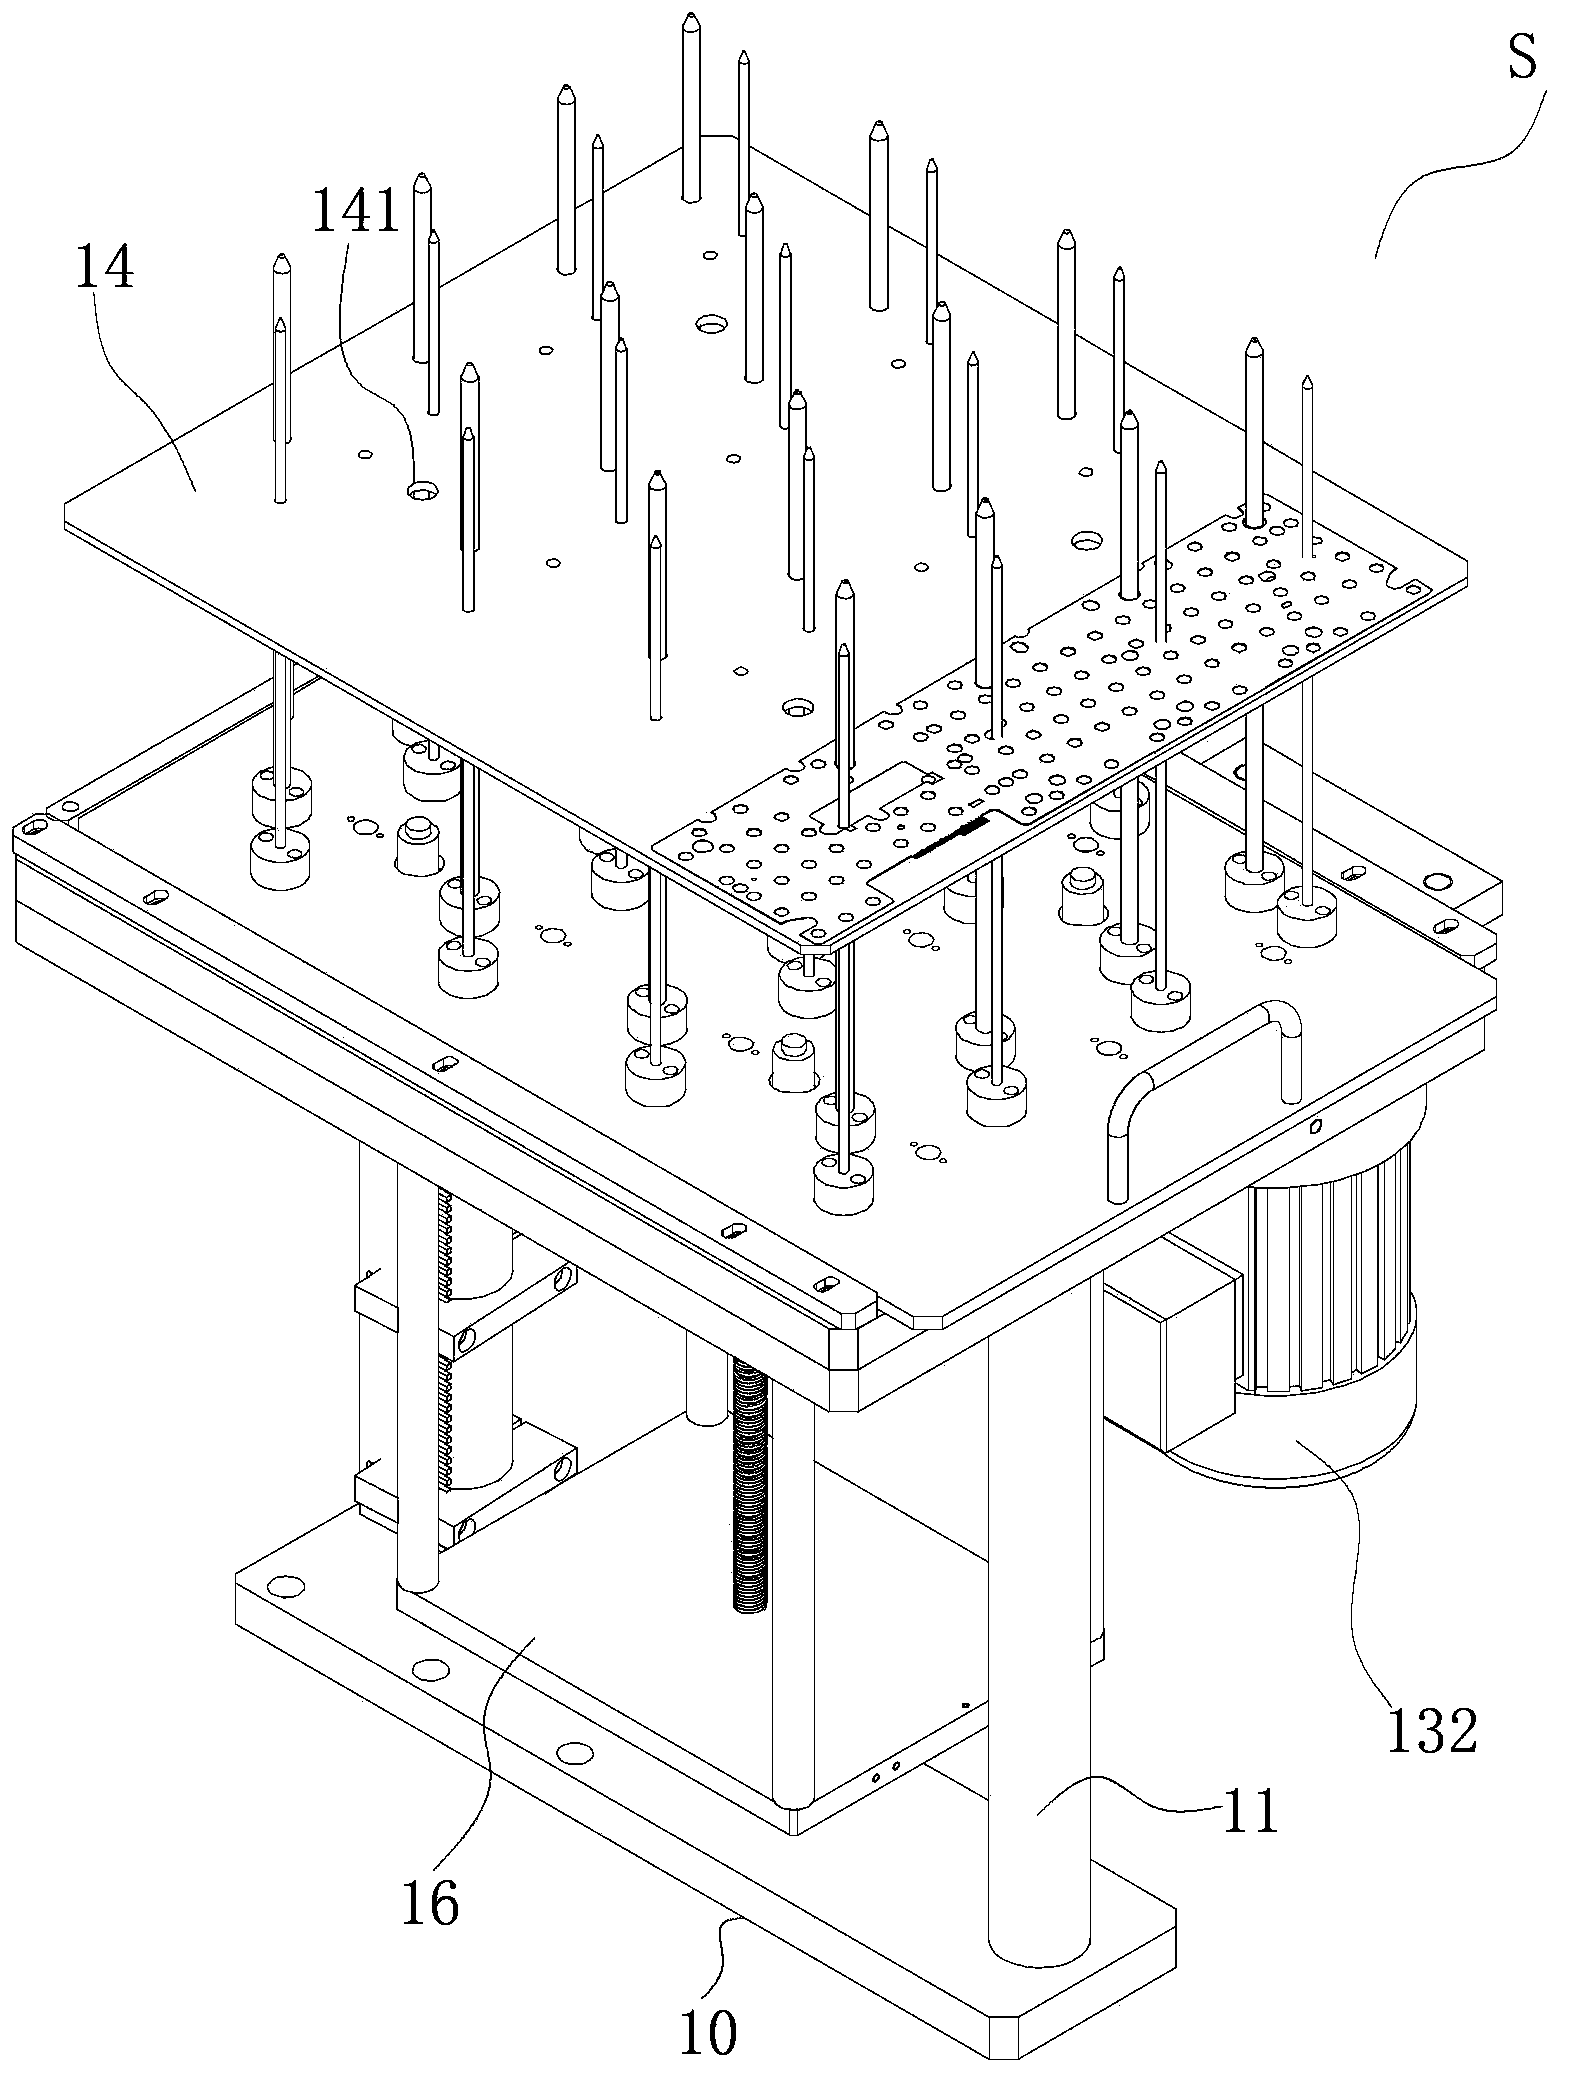 Lifting type material supporting mechanism and material collecting device of conducting film assembly